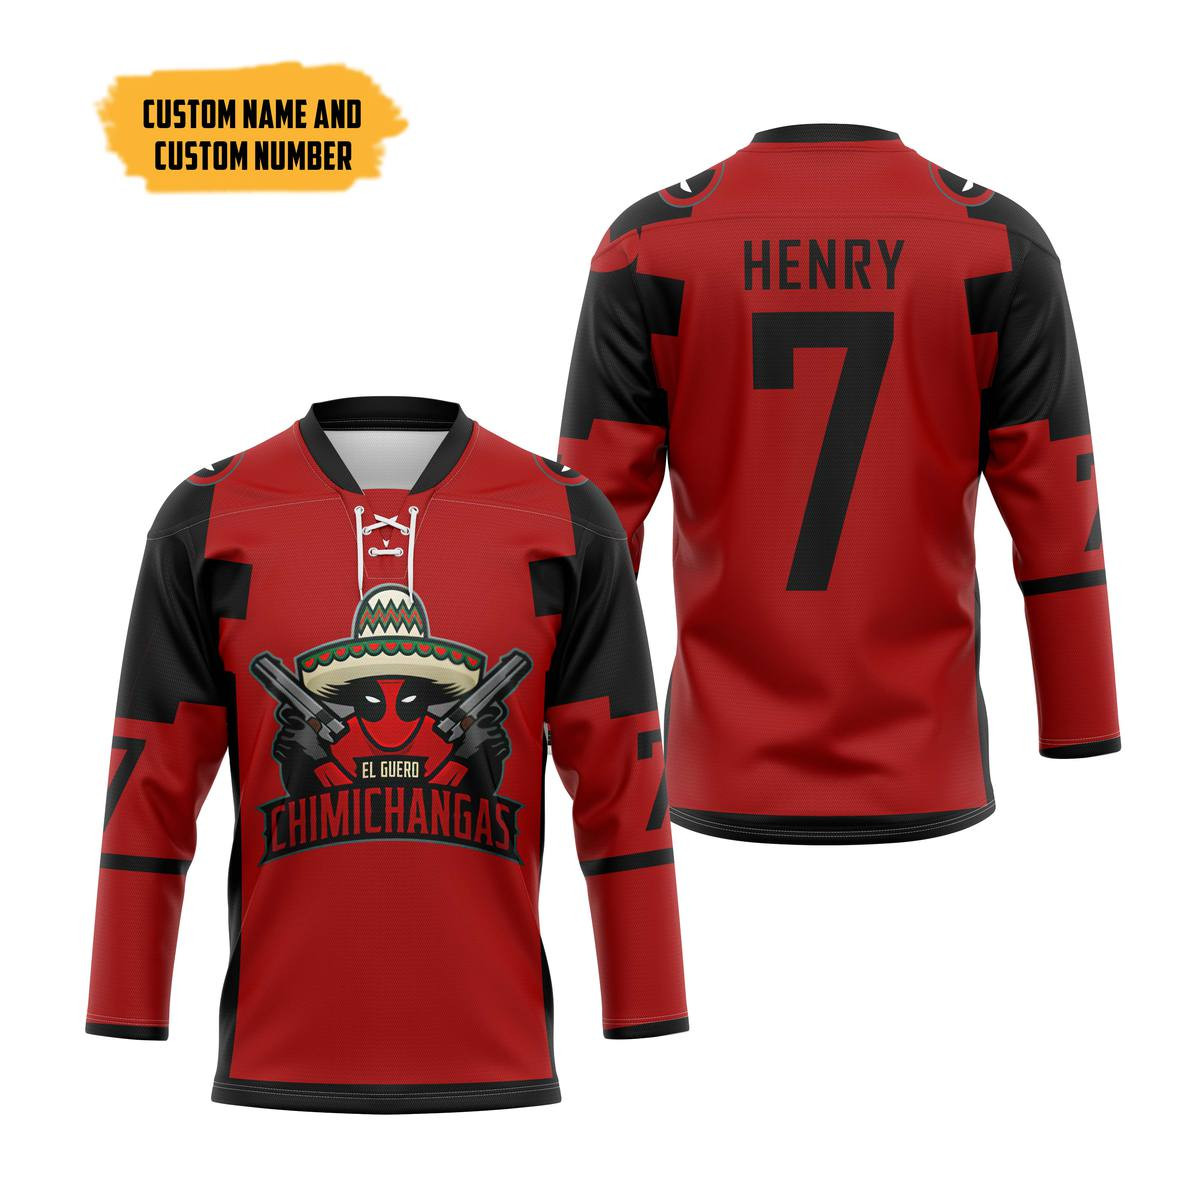 The Best Hockey Jersey Shirt in 2022 209